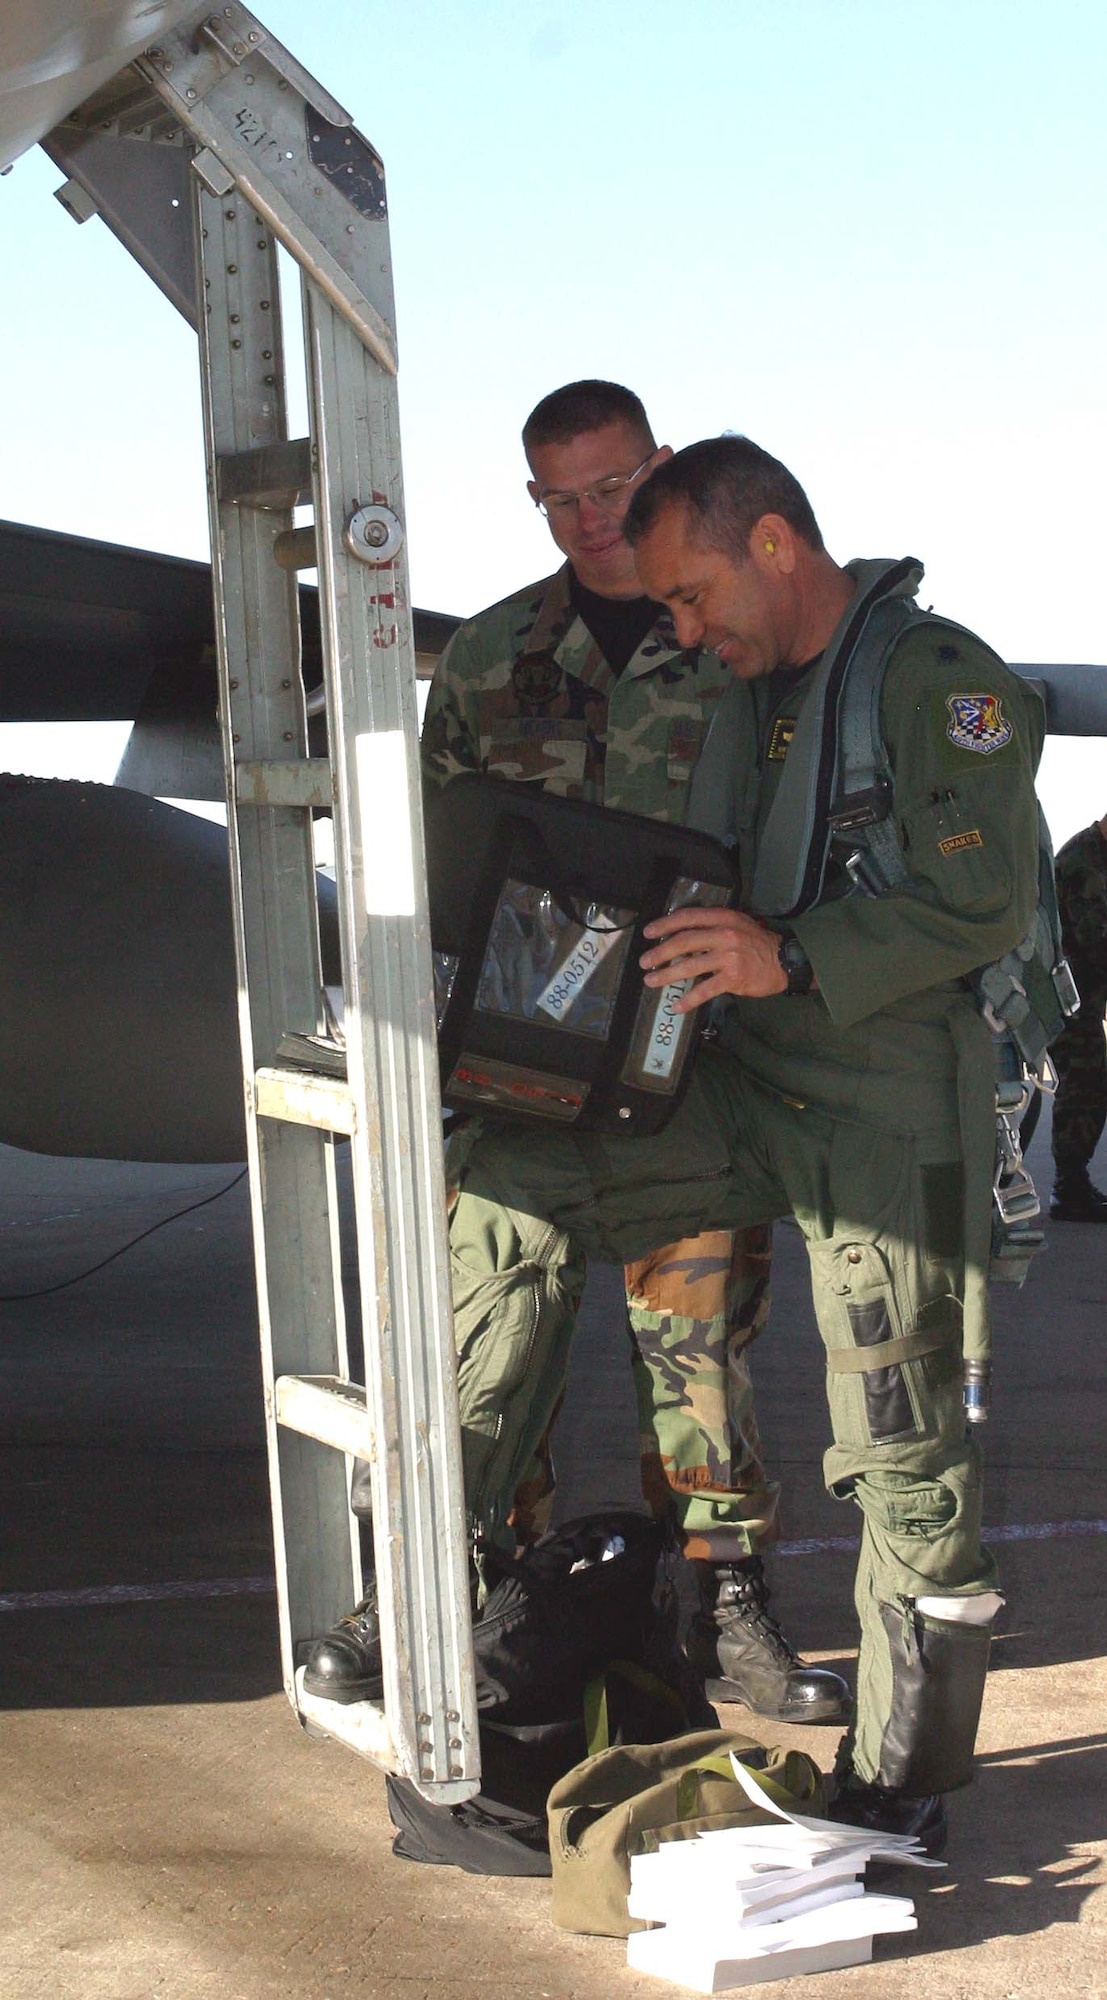 Senior Airman Jeremy Myers and Lt. Col. Kurt Gallegos greet each other and go over procedures before flight.